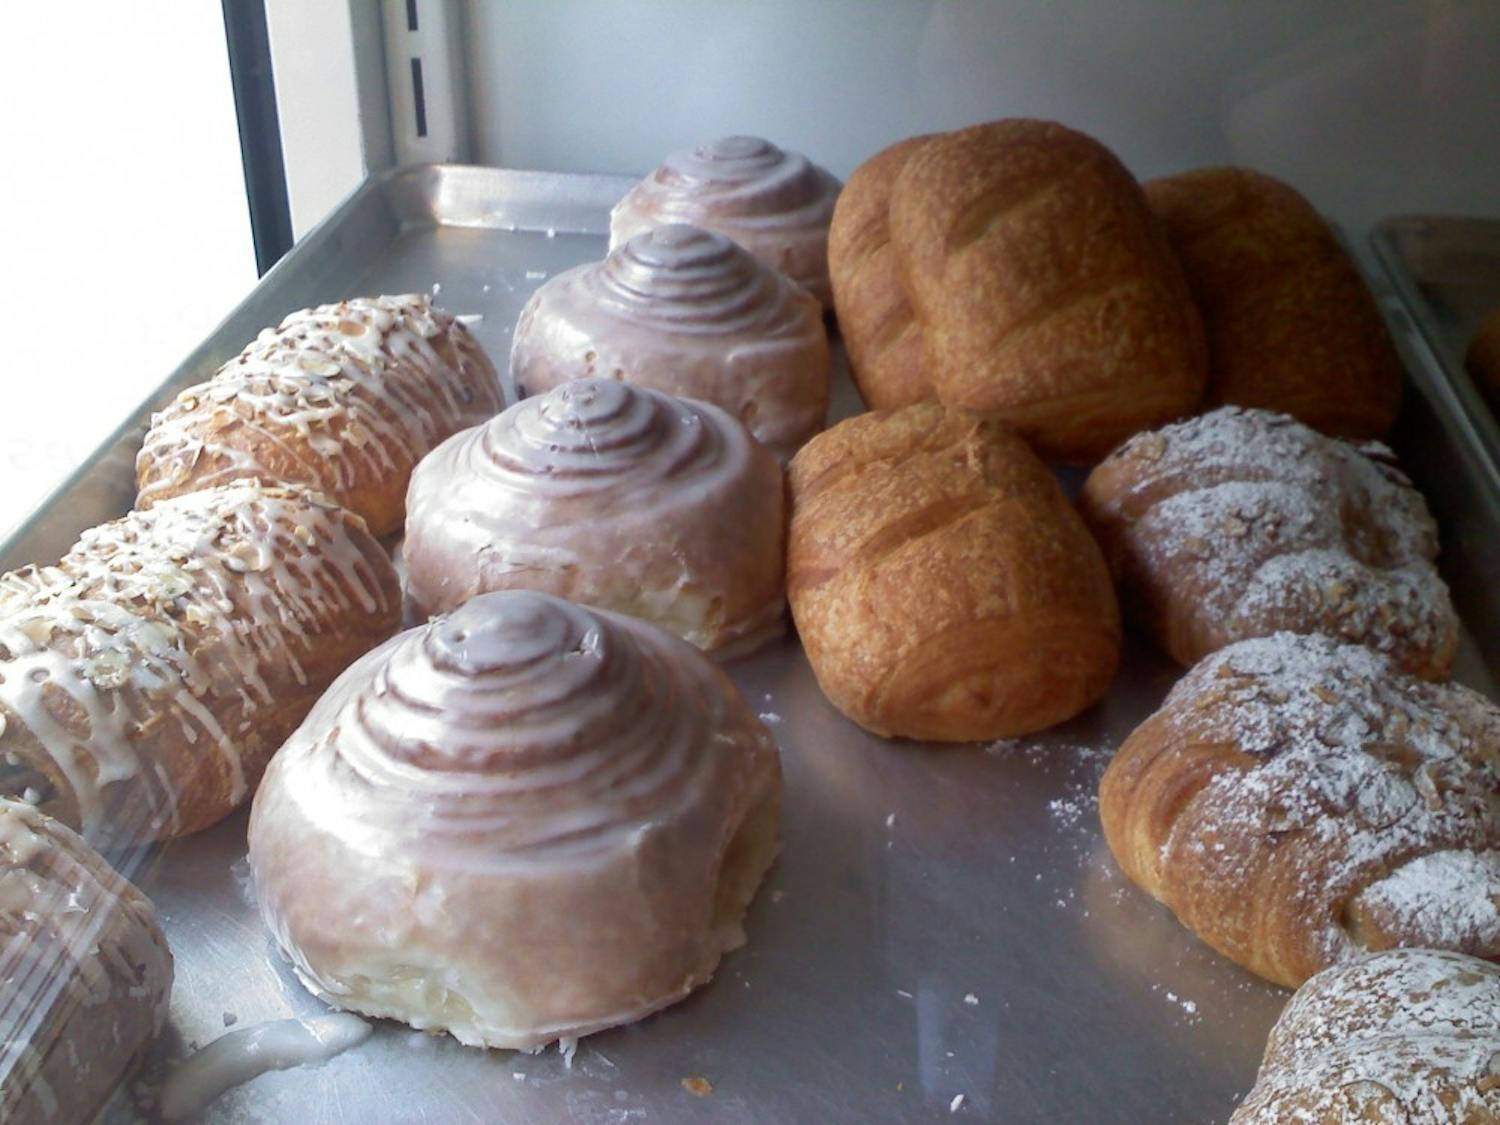 	At the Daily Grind you can get a wide assortment of pastries and snacks to accompany your drink.